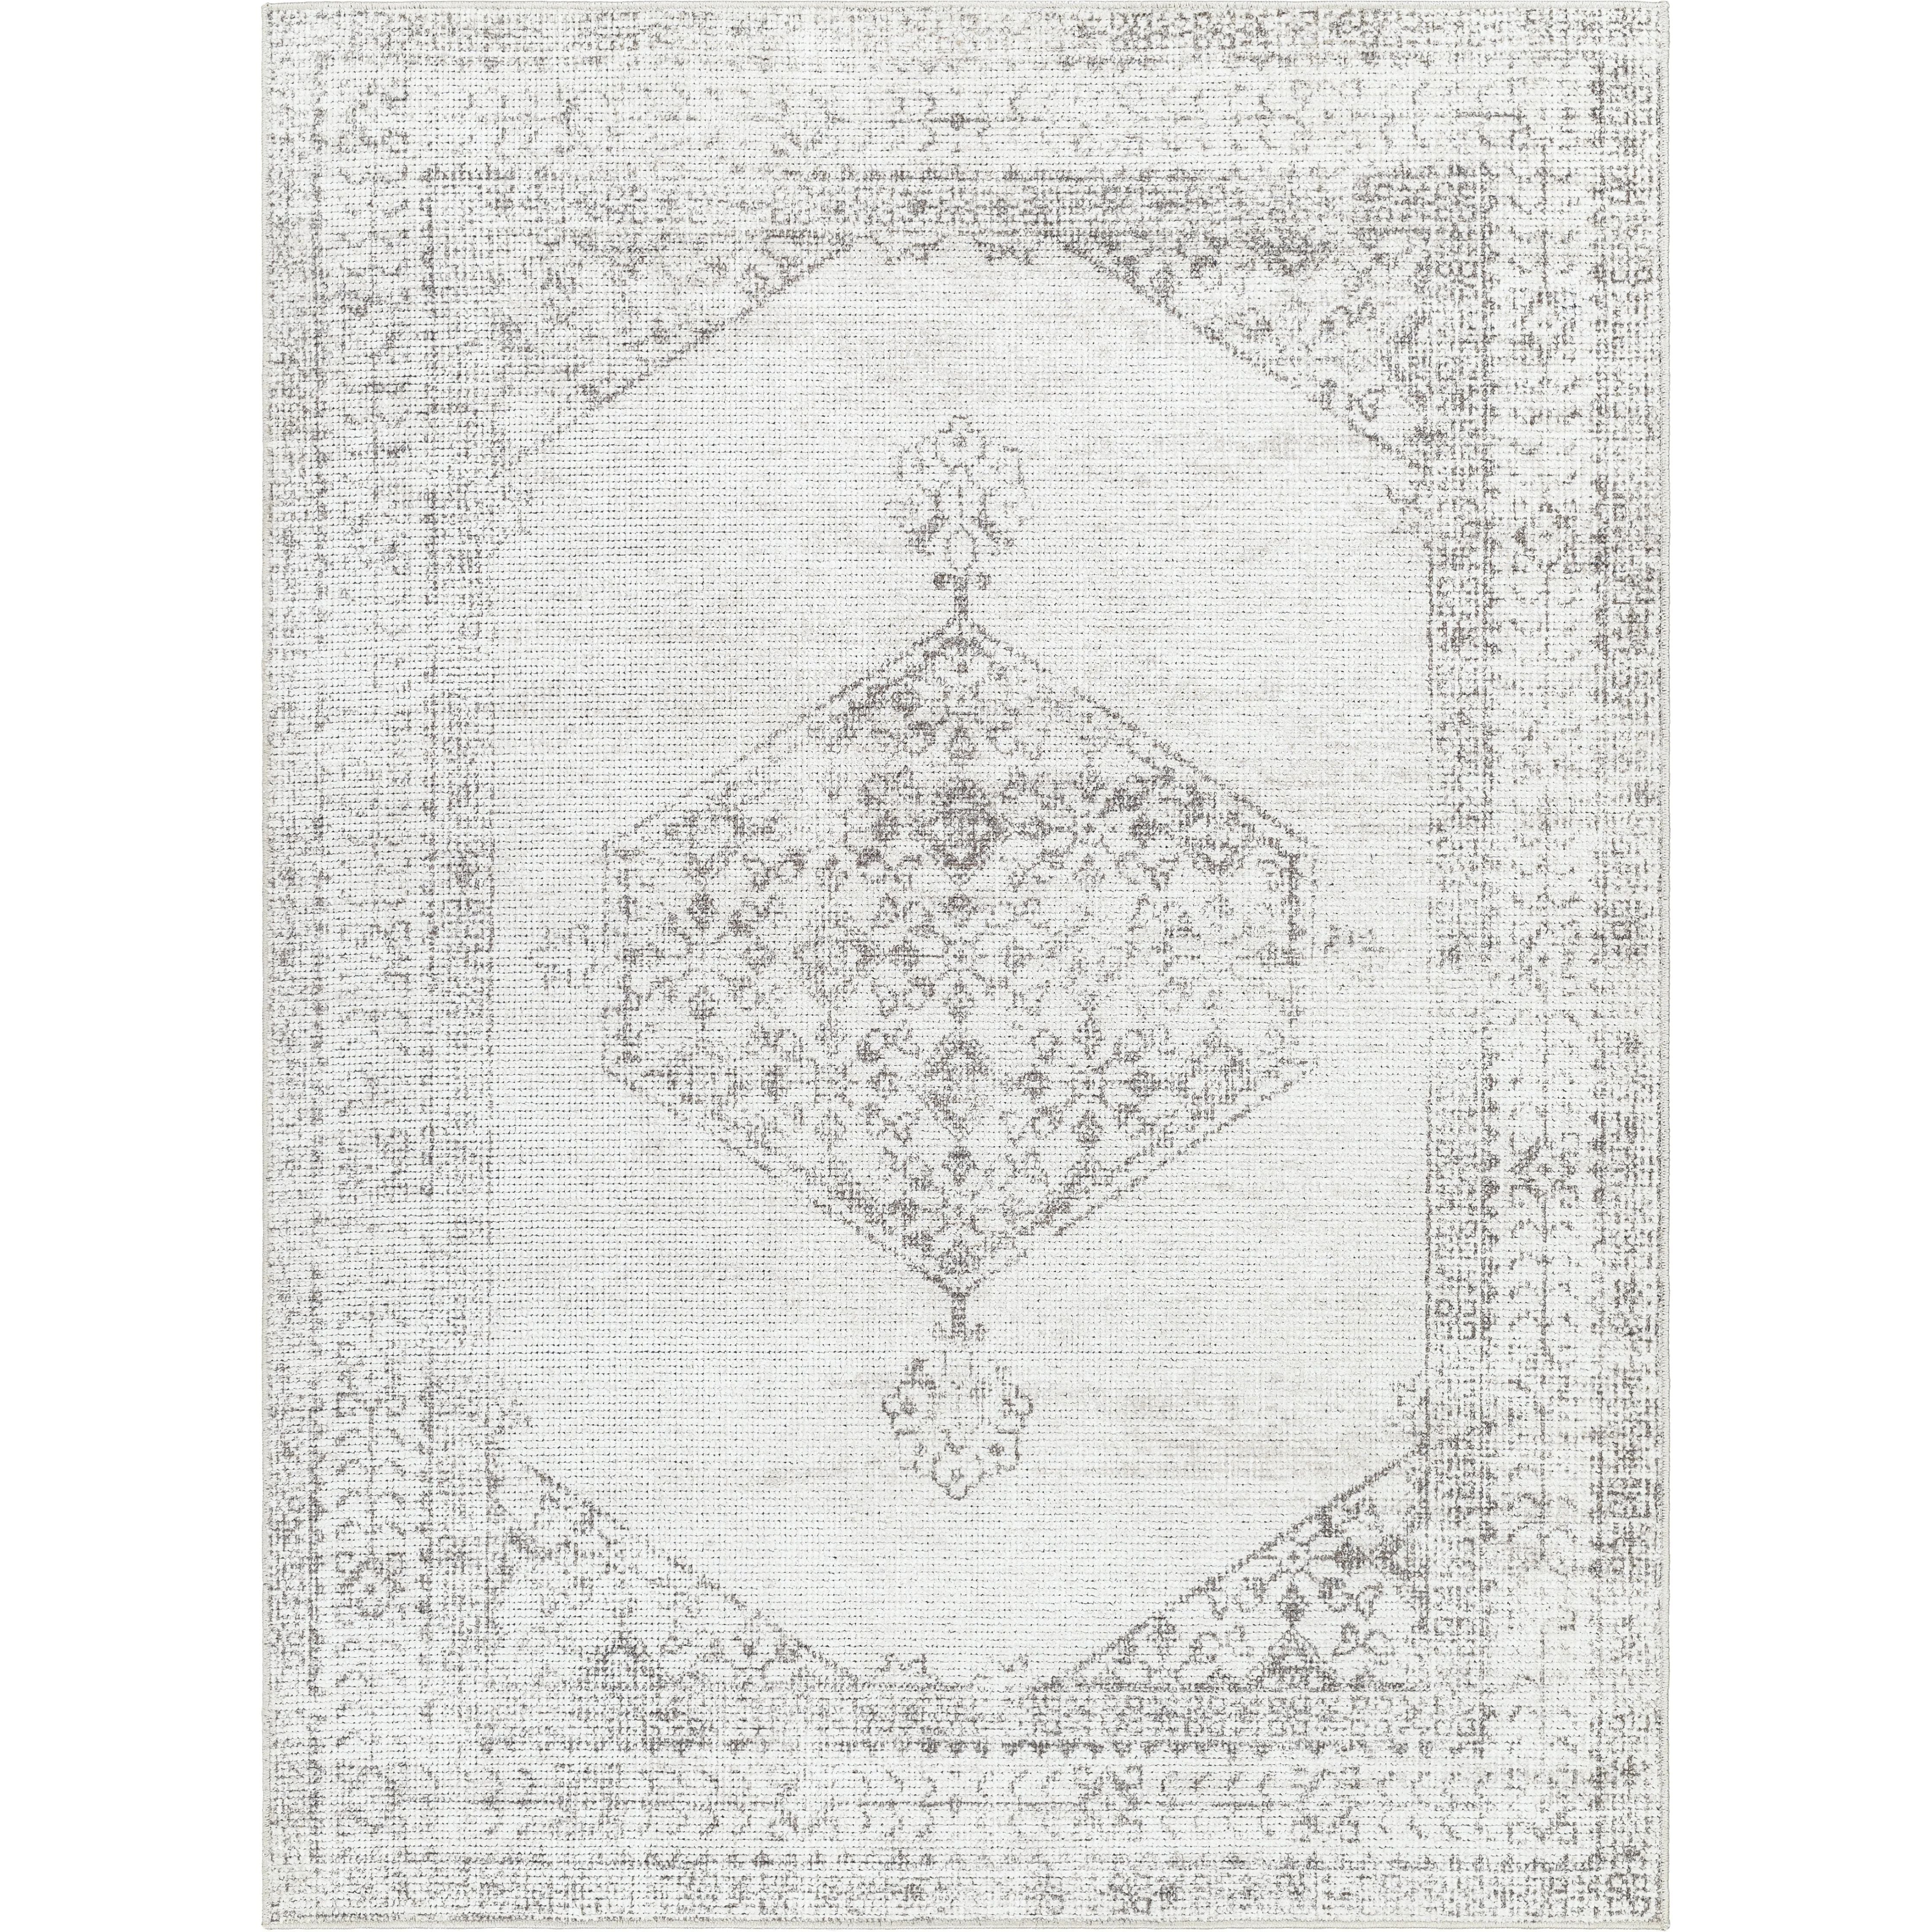 PNW Home x Surya available at Amethyst Home shipping to Australia, UK, and Canada. Organic modern design with easy to clean rugs for a family home in  the Newport Beach metro area.